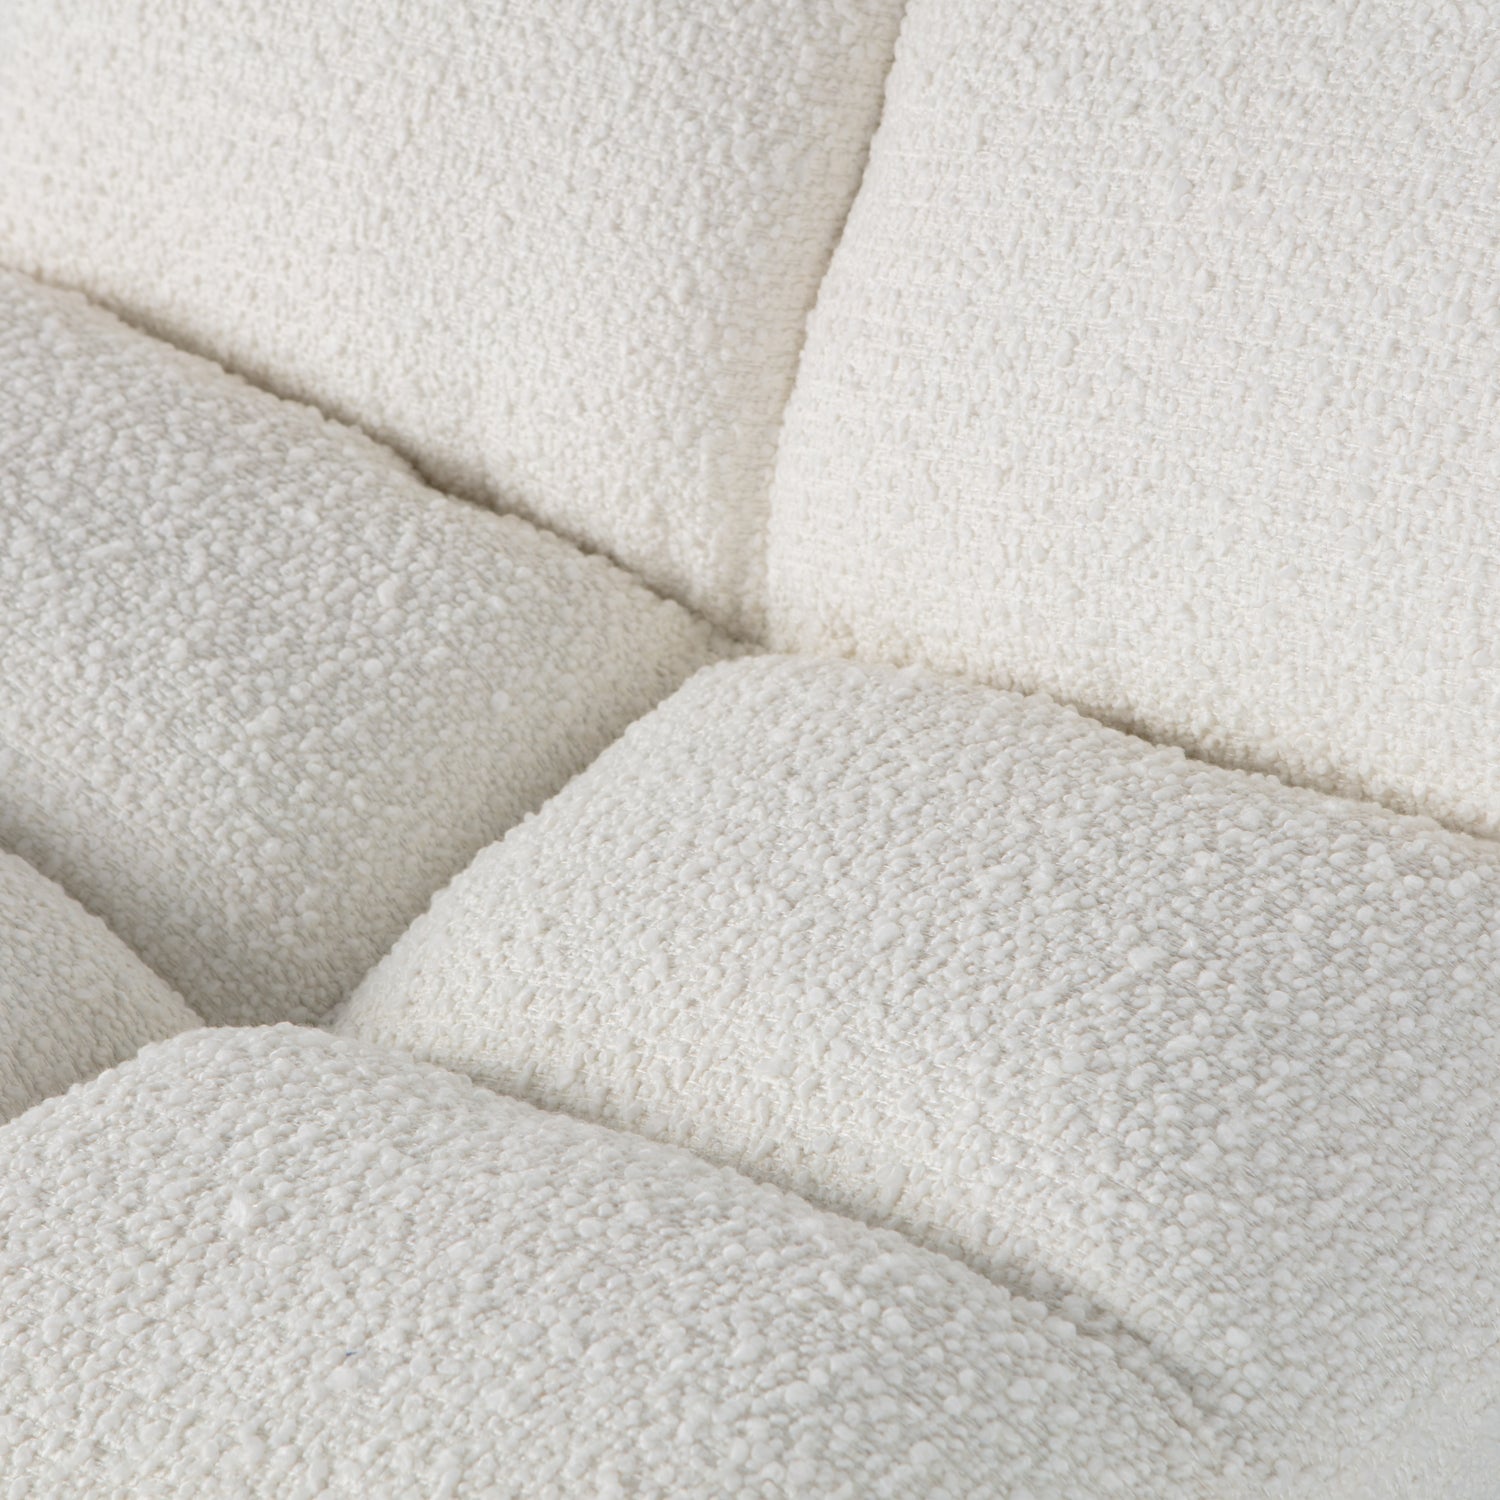 377118-O-02_VS_Vinny_draaifauteuil_boucle_off_white_detail.jpg?auto=webp&format=png&width=1500&height=1500